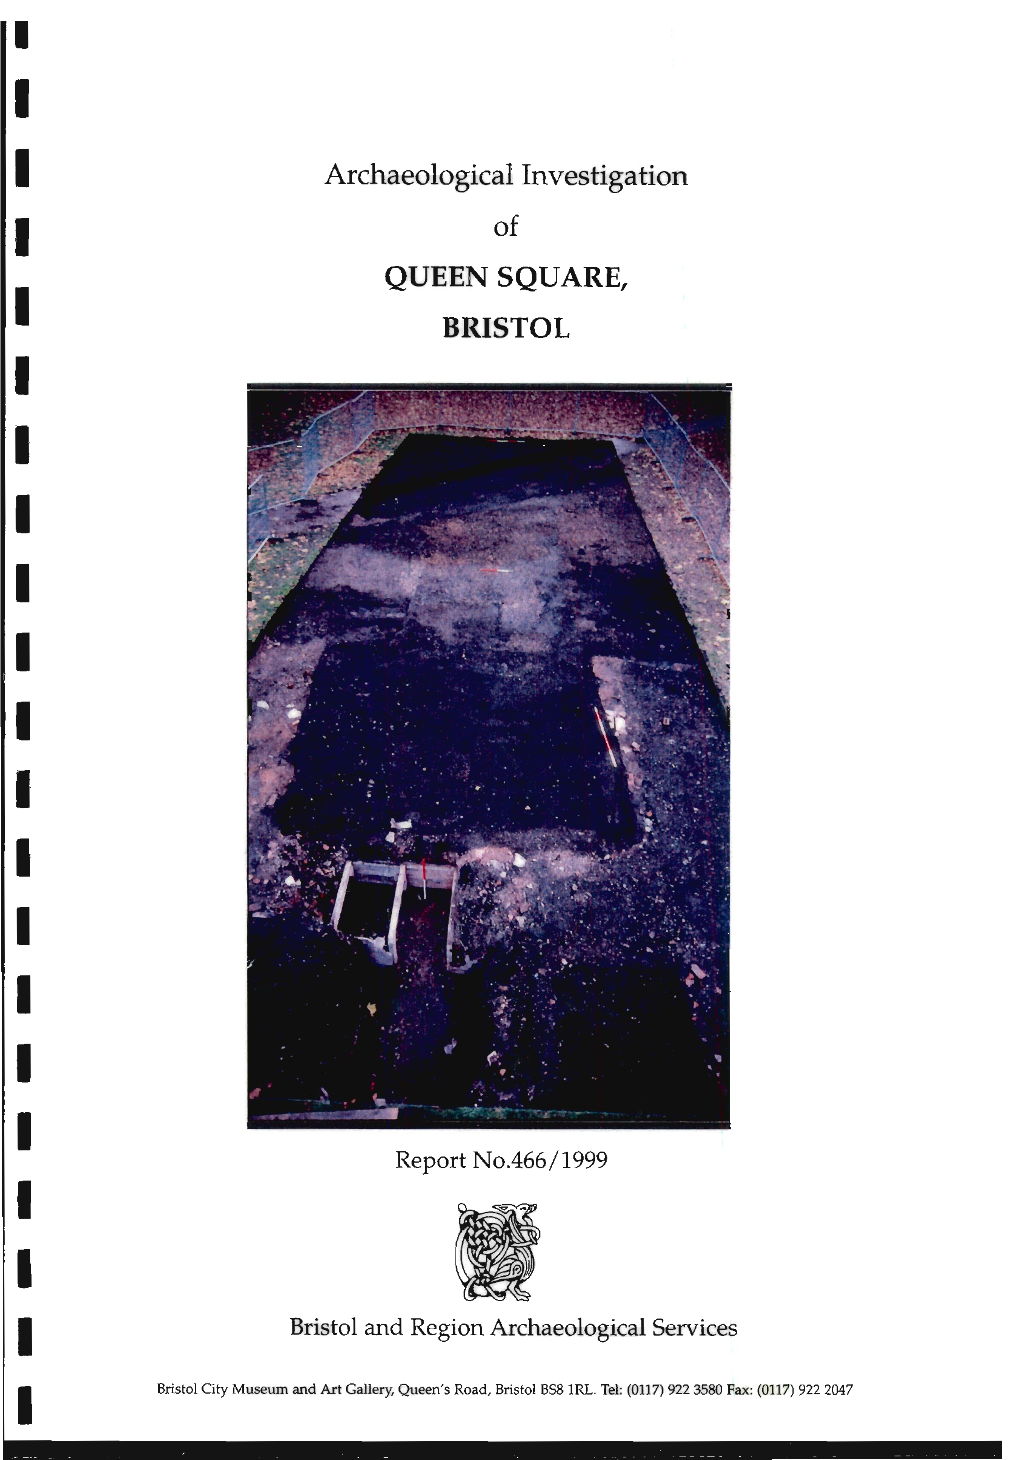 Archaeological Investigation of QUEEN SQUARE, BRISTOL